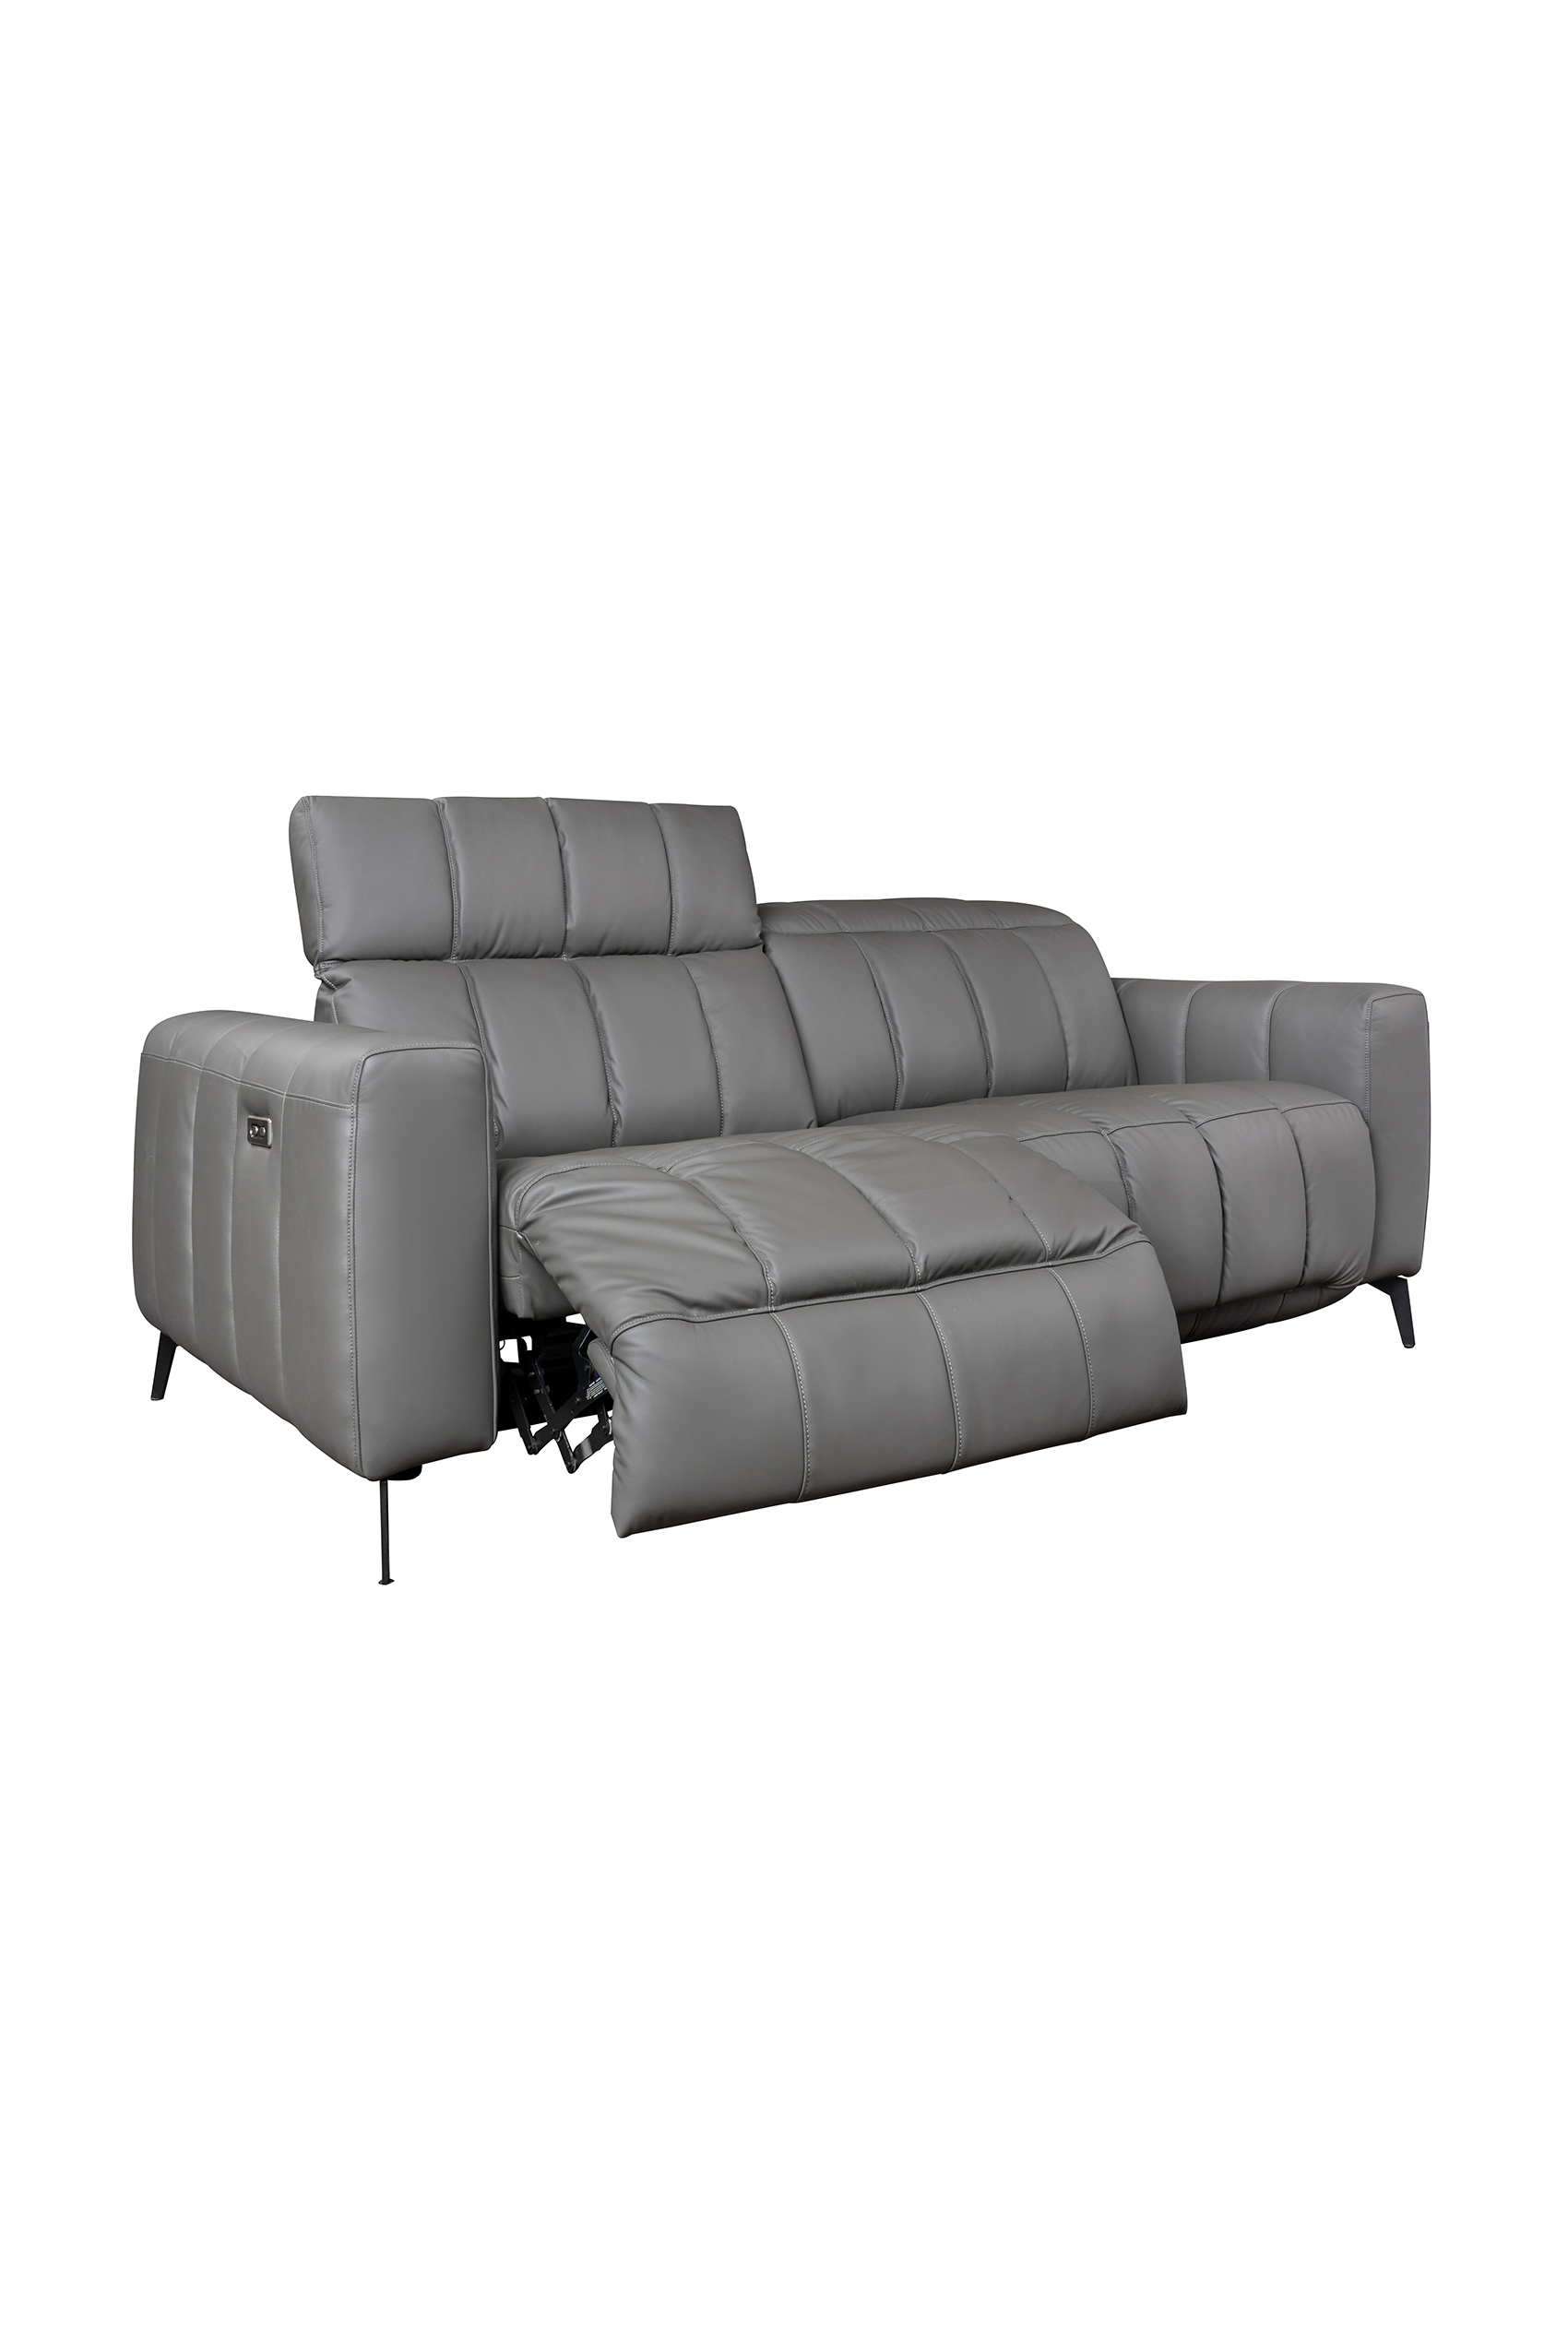 Pesaro Leather Sofa With Dual Recliner